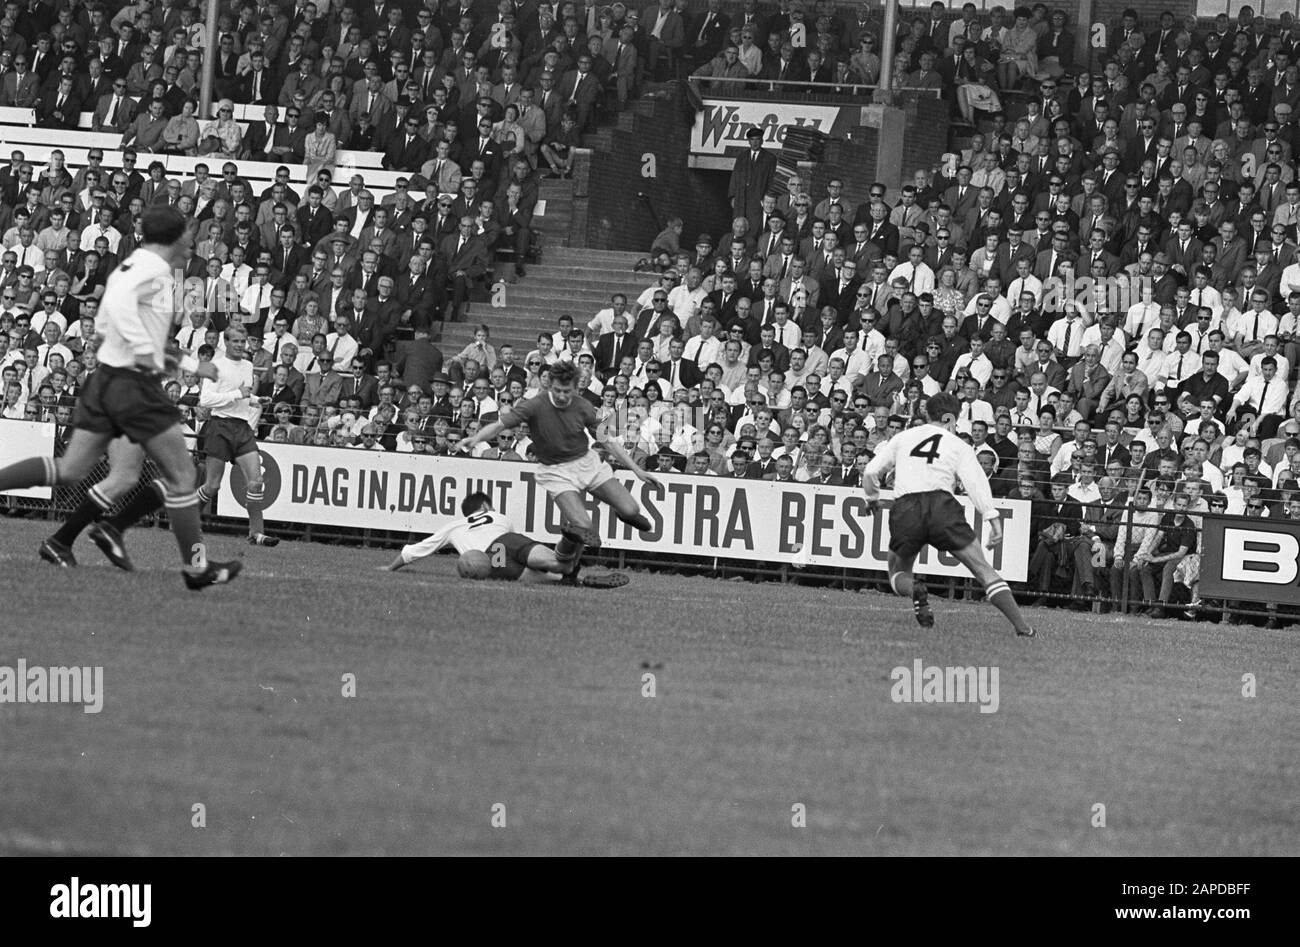 Ajax versus Stoke City 5-3, Co Prins in duel with spindle Stoke City Date: August 8, 1965 Keywords: sport, football Person name: Co Prins Institution Name: AJAX Stock Photo